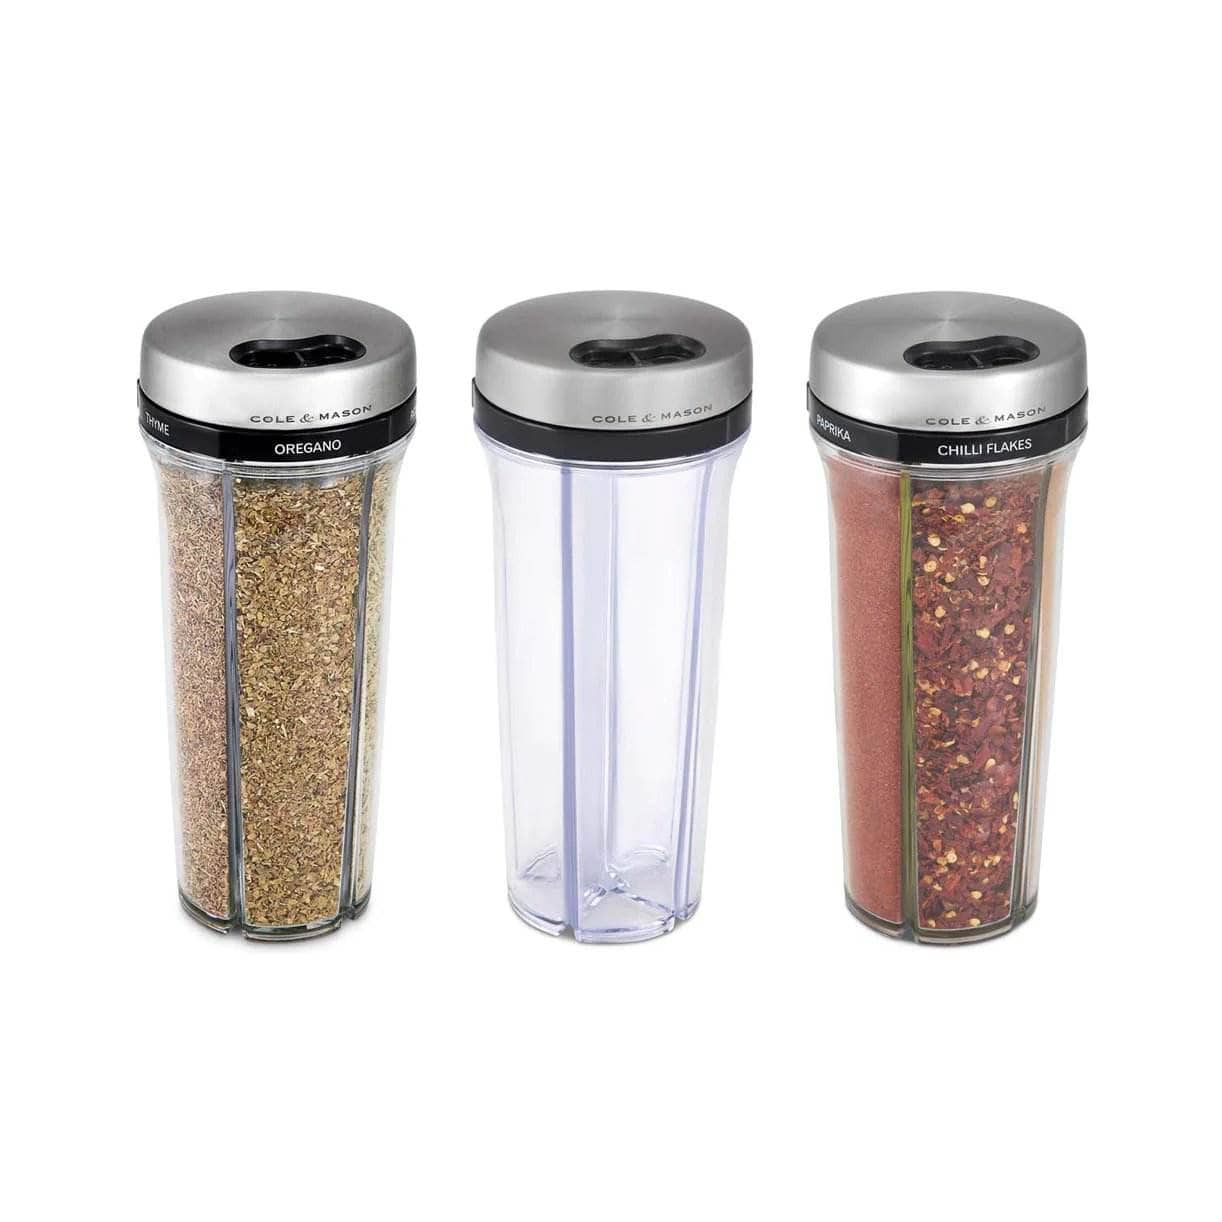  -  Saunderton Spice Shaker With Spices  -  60001568